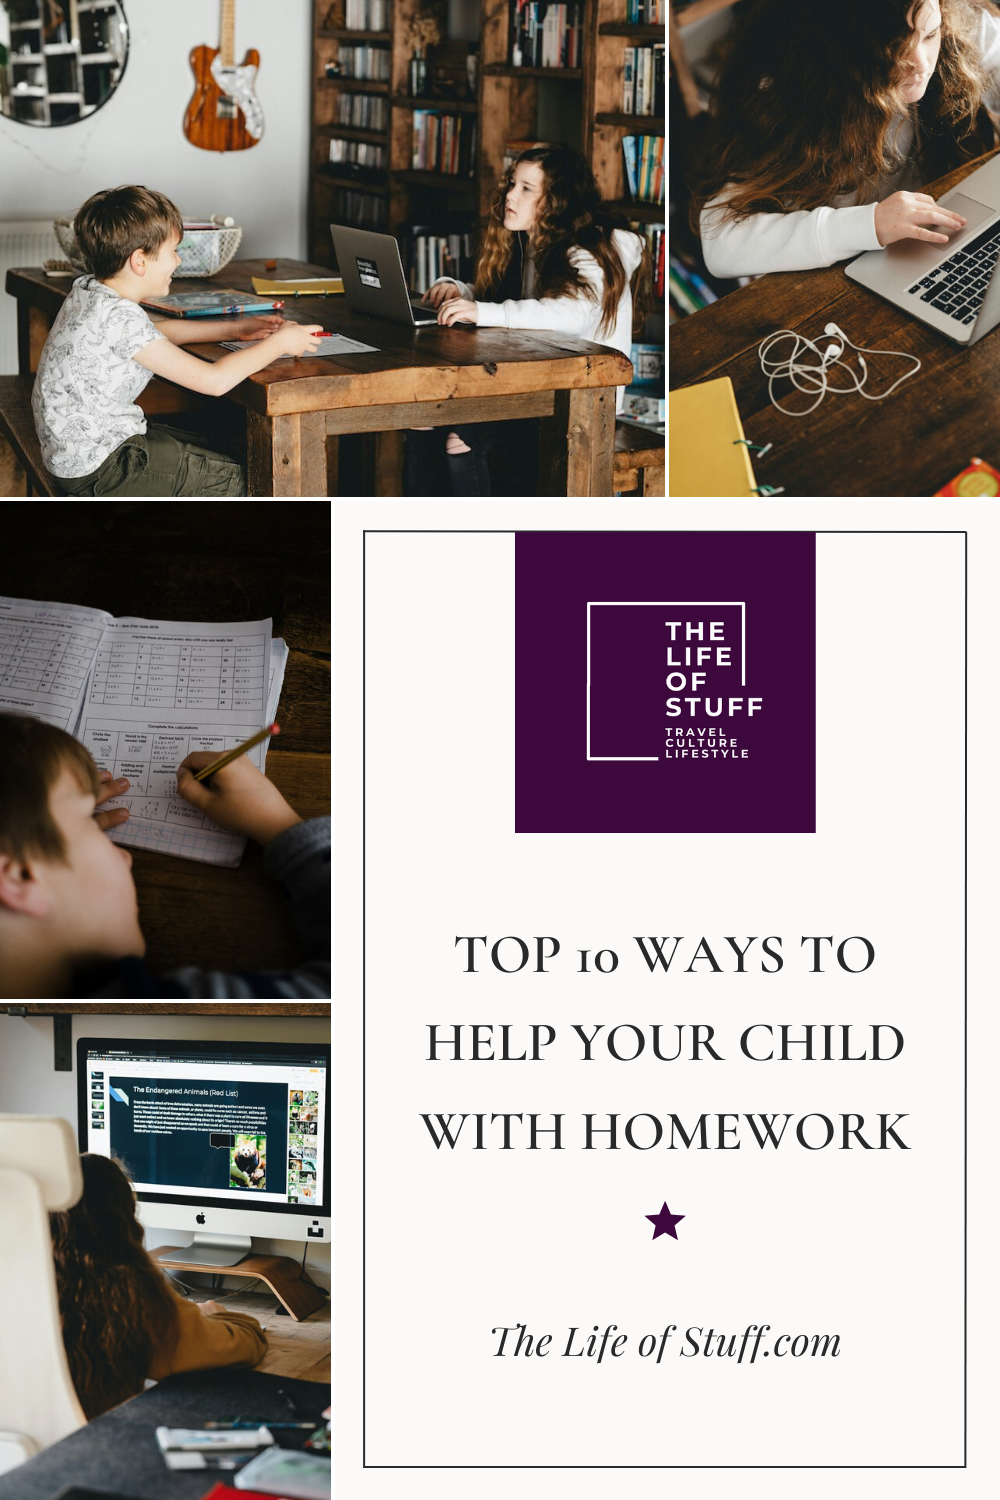 Top 10 Ways to Help Your Child with Homework - The Life of Stuff